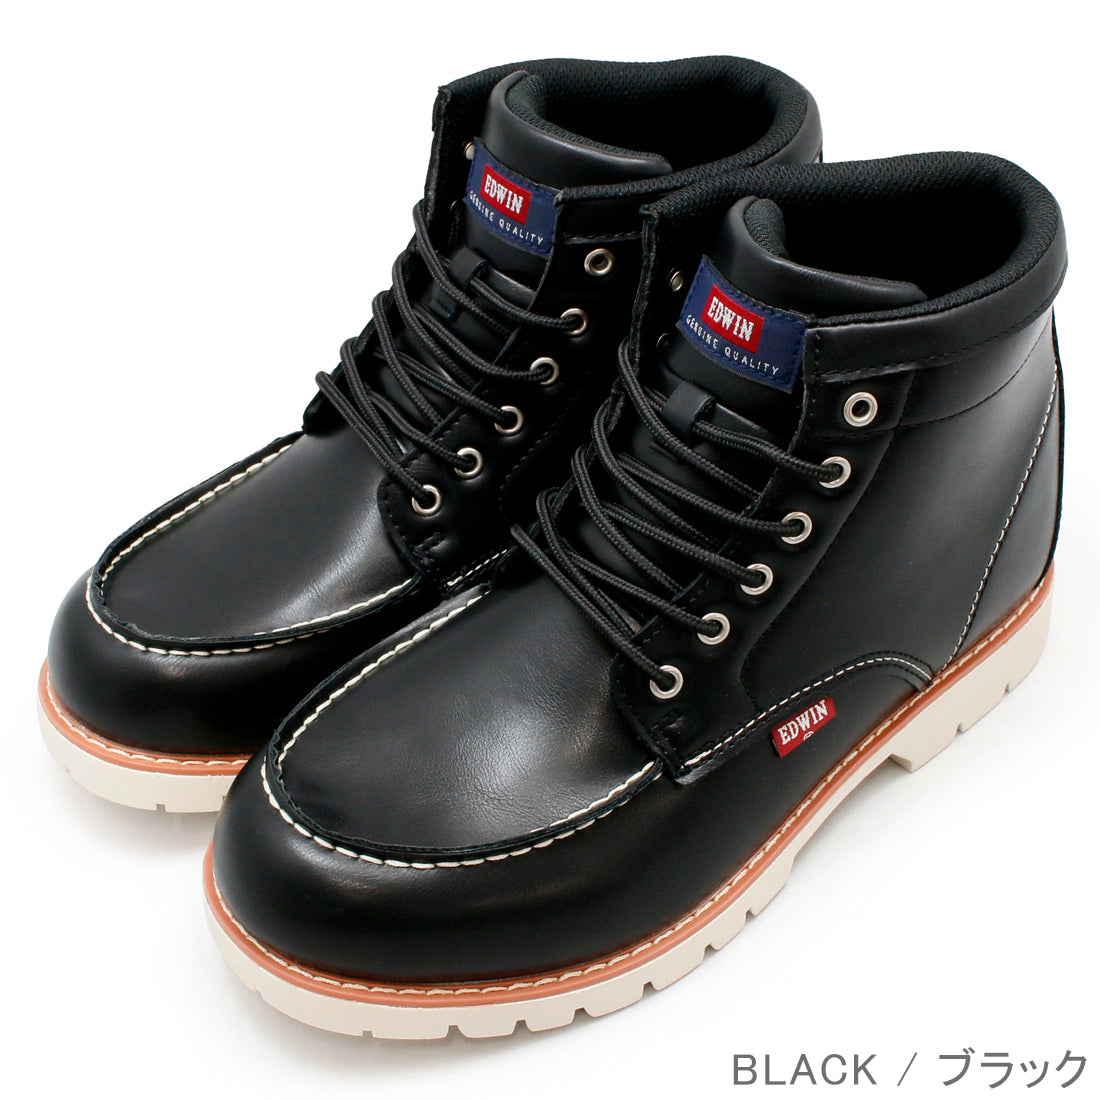 🇯🇵EDWIN casual shoes sent directly from Japan💦️waterproof☔️shoes👢📢Order